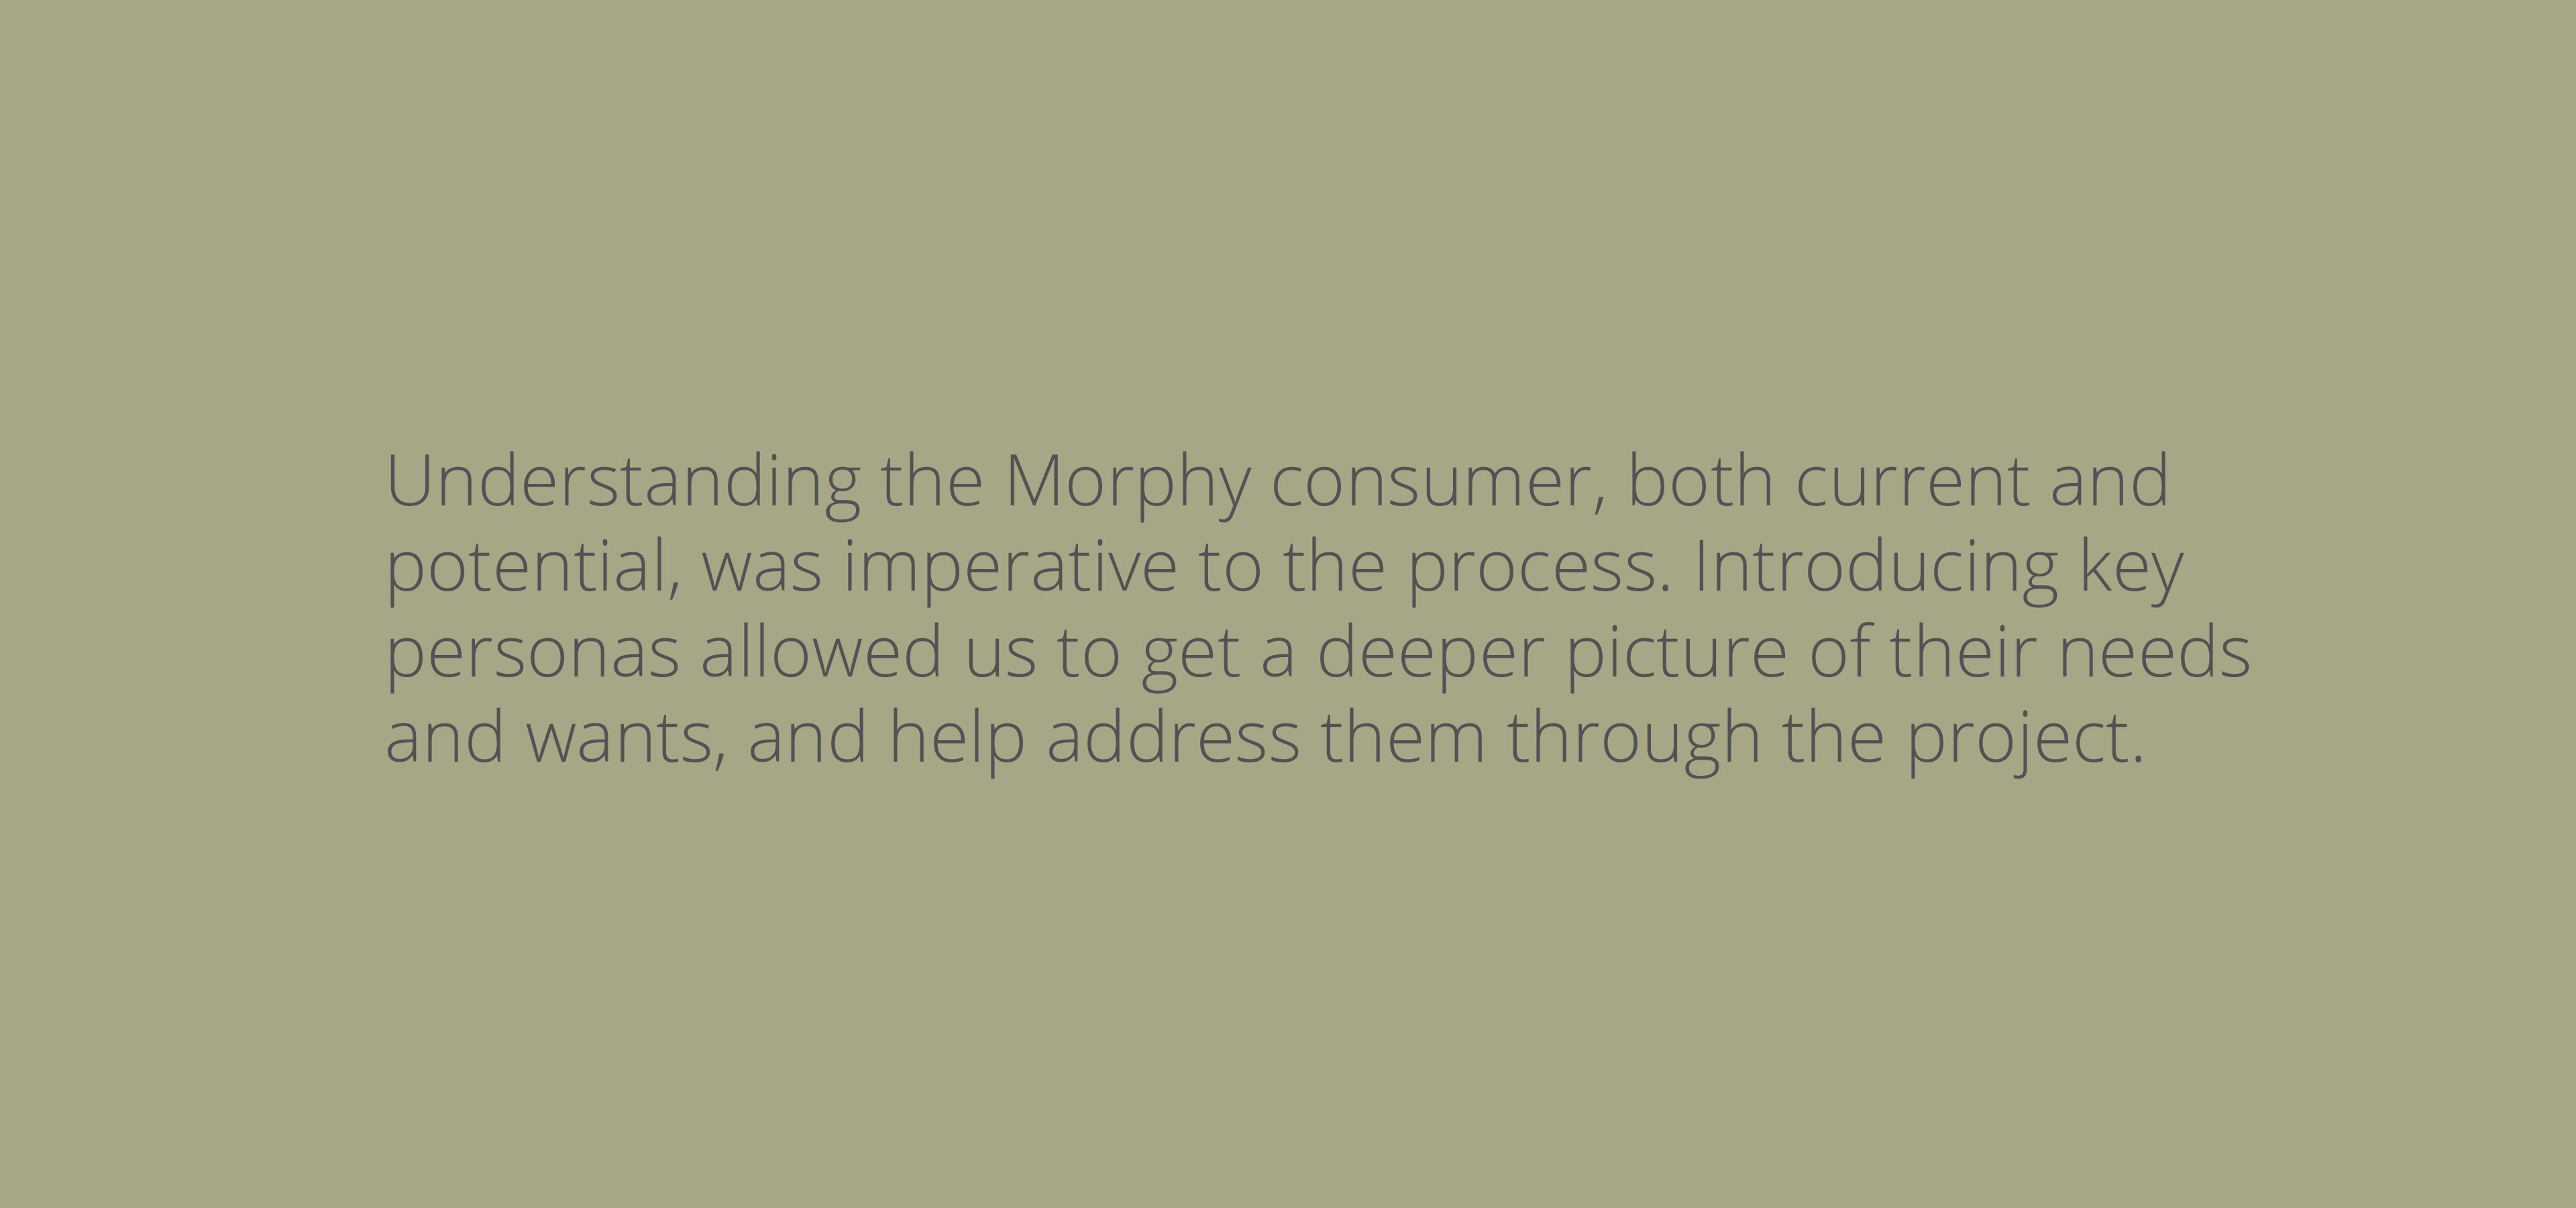 We understand the Morphy Richards consumer